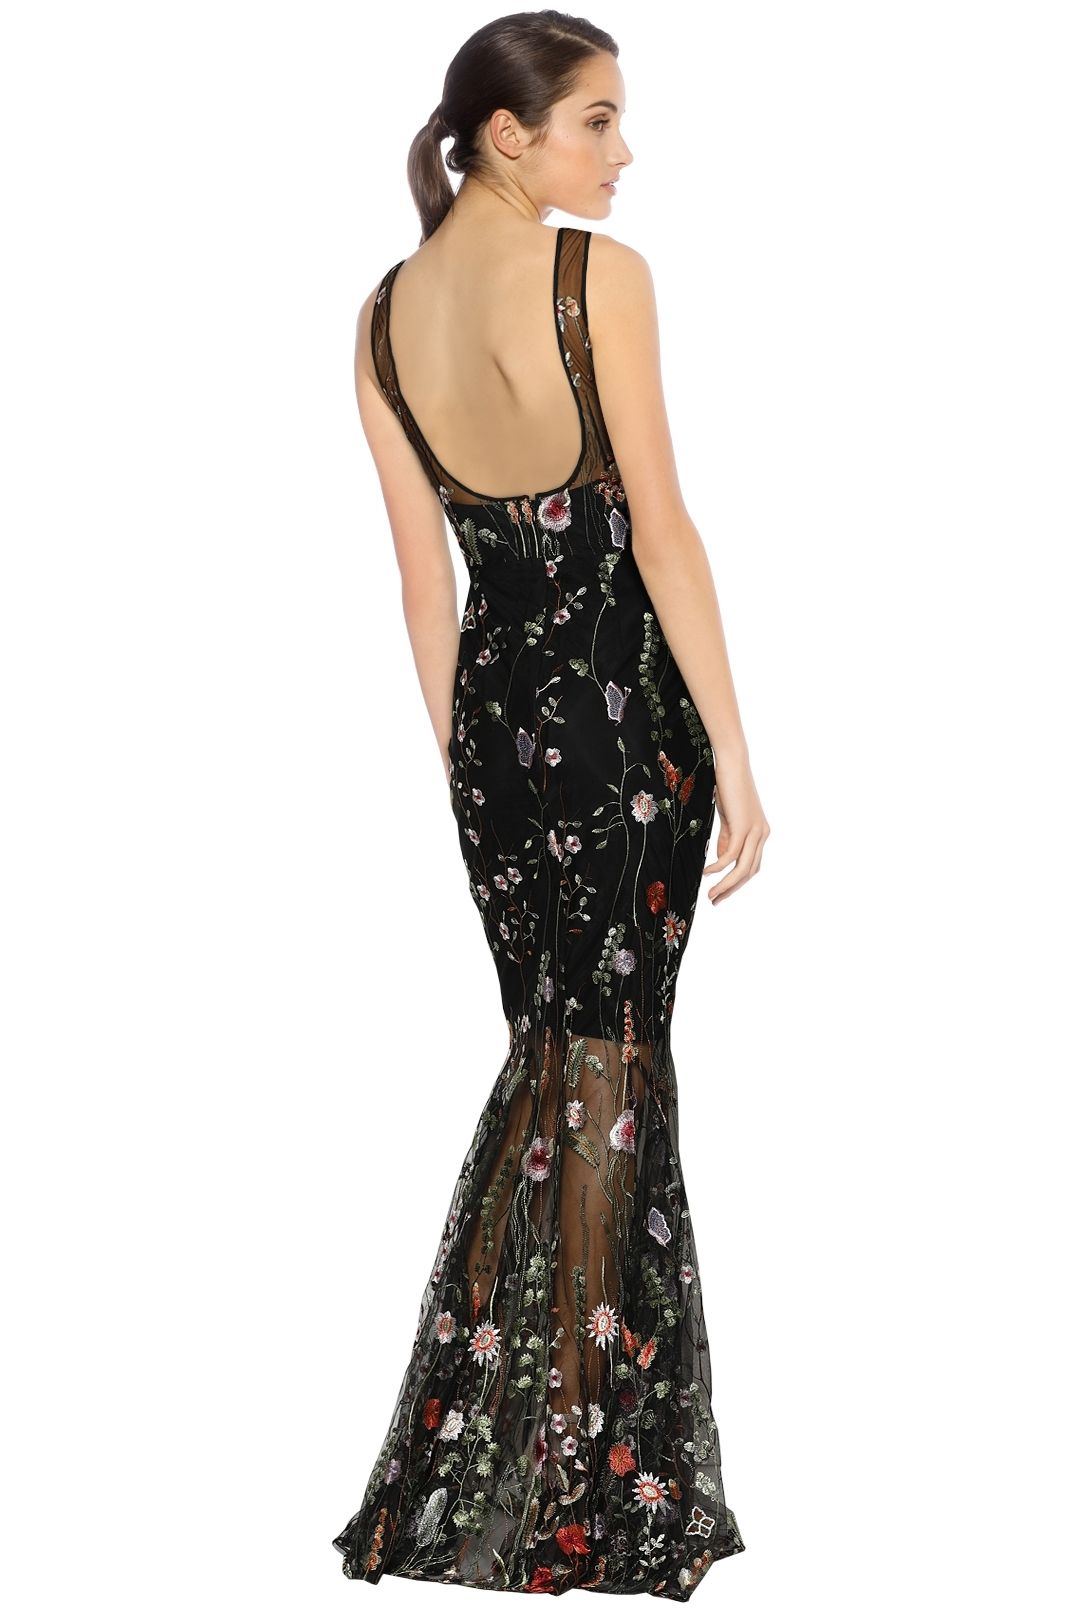 Grace and Hart - Wu You Fitted Gown - Fantasy Black - Back